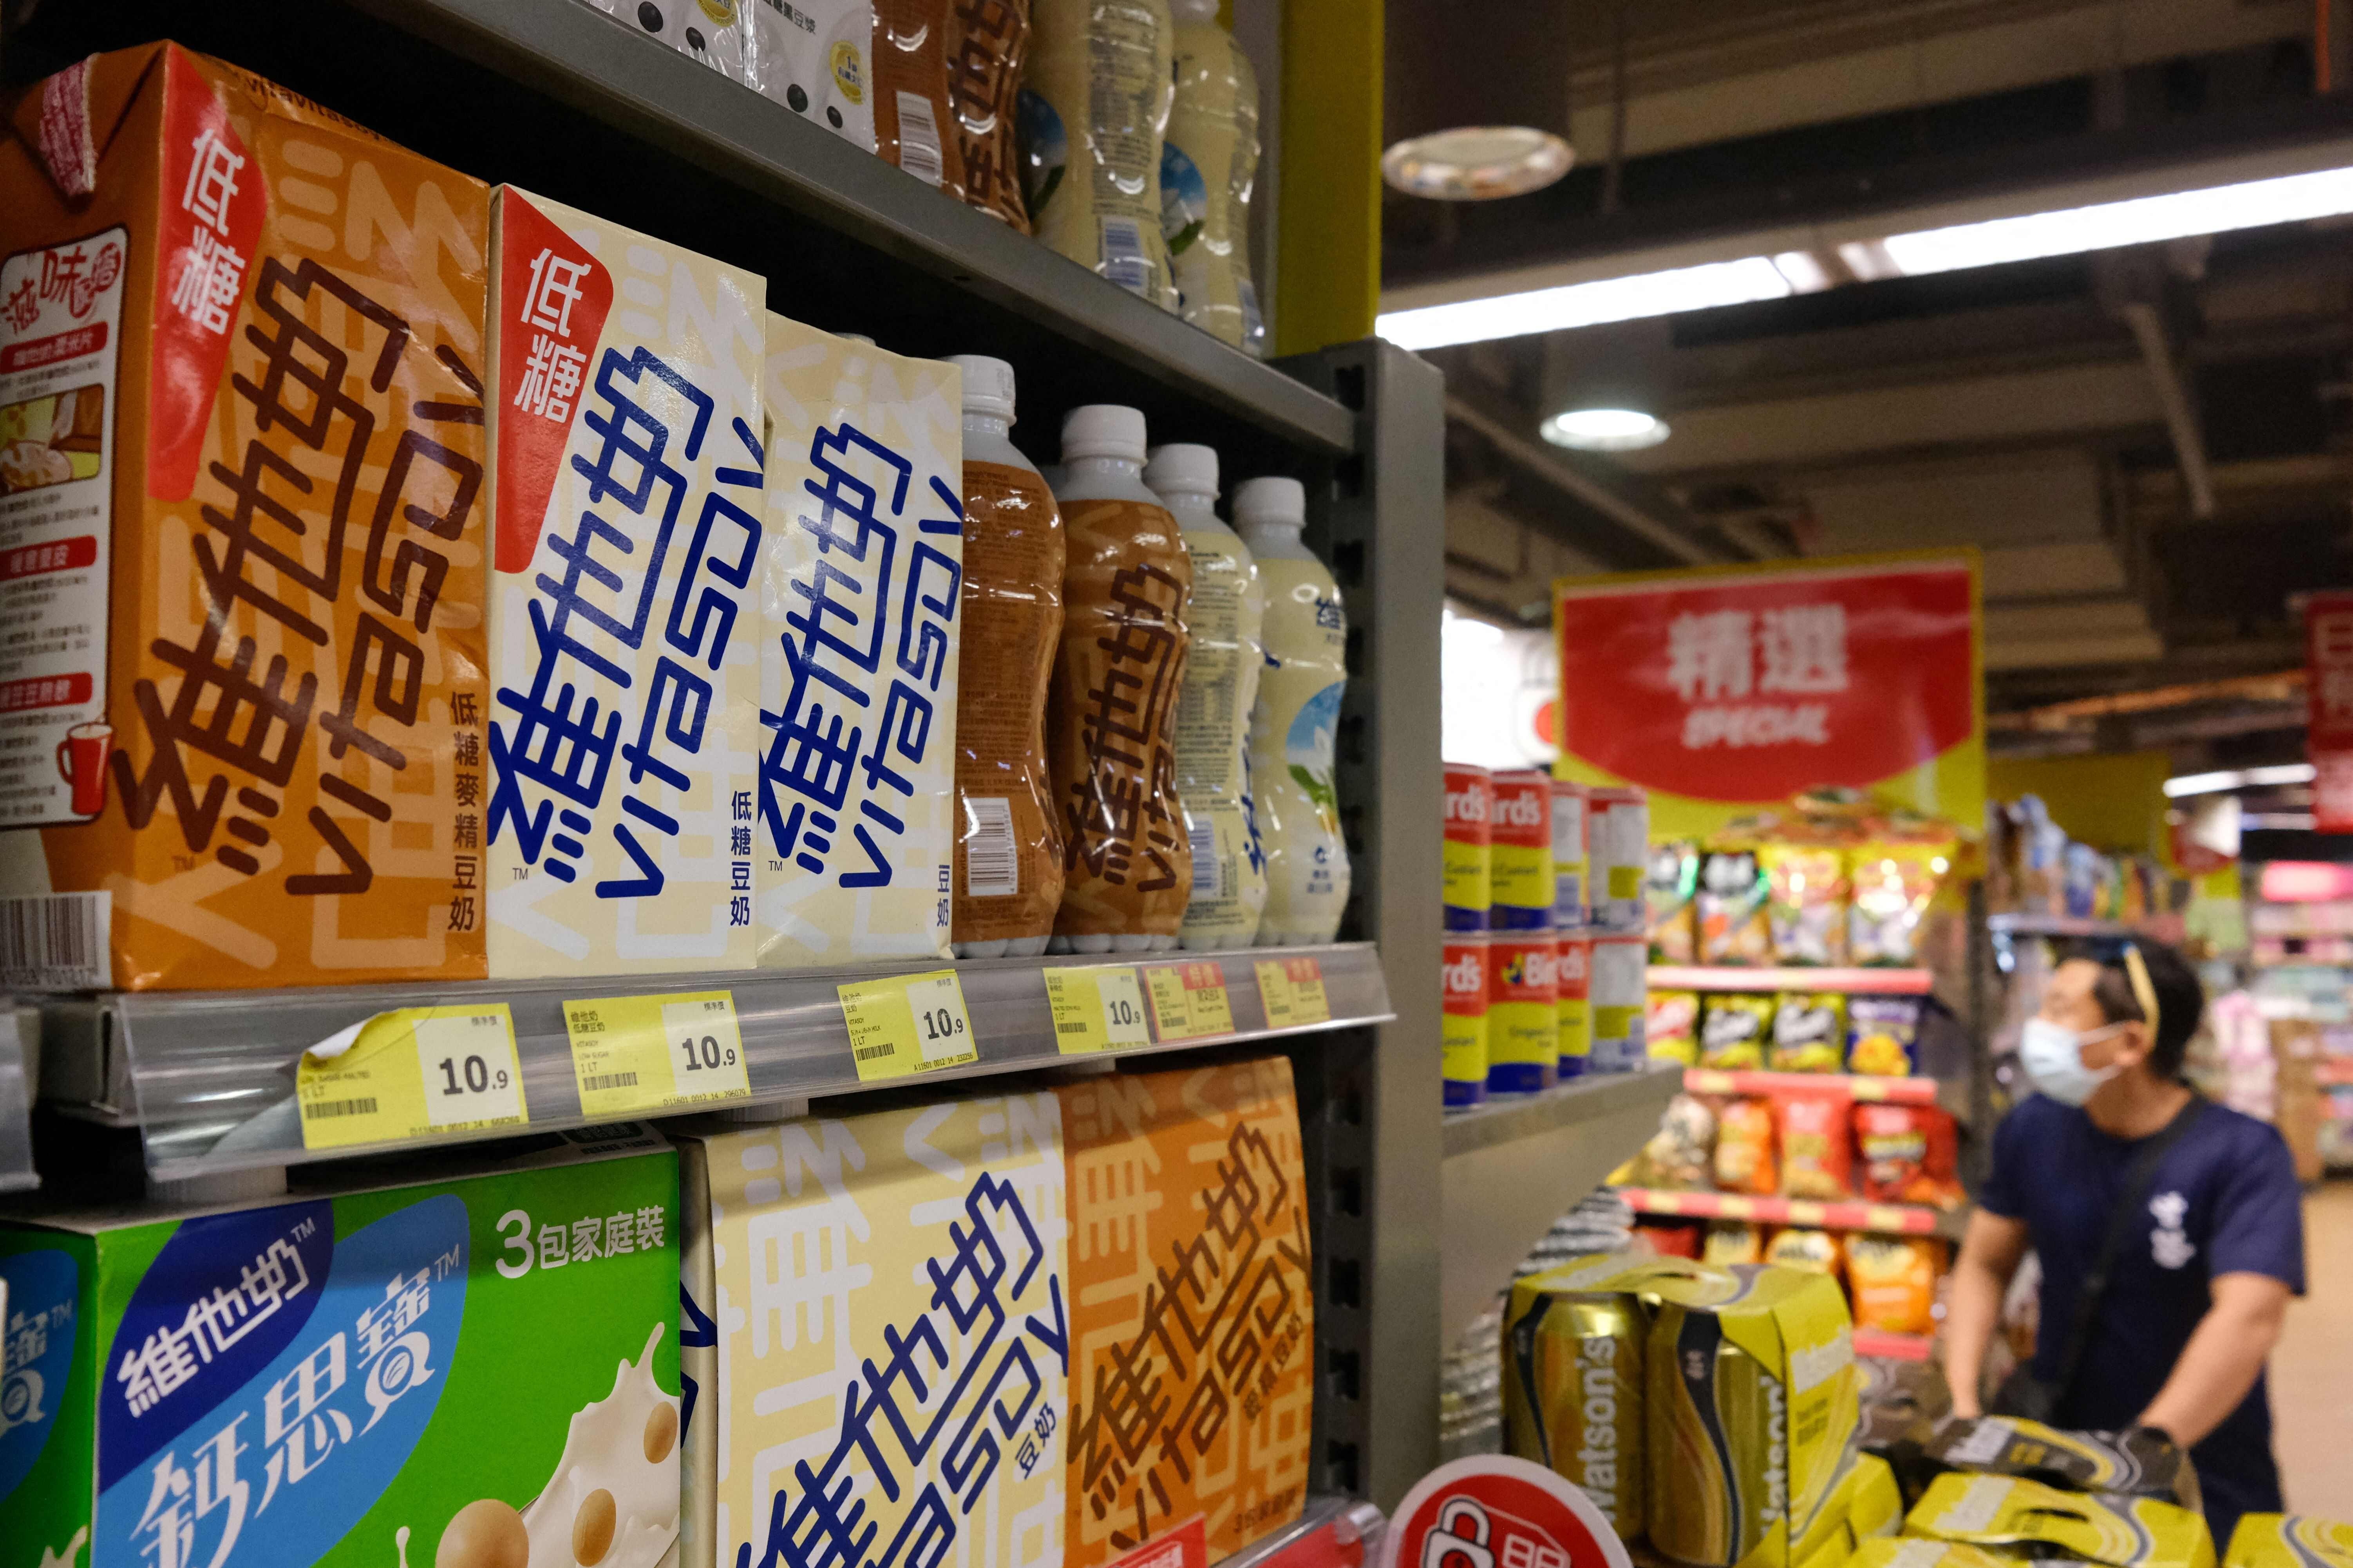 Soy milk drinks produced by Vitasoy are displayed on a supermarket shelf in Hong Kong. Photo: AFP